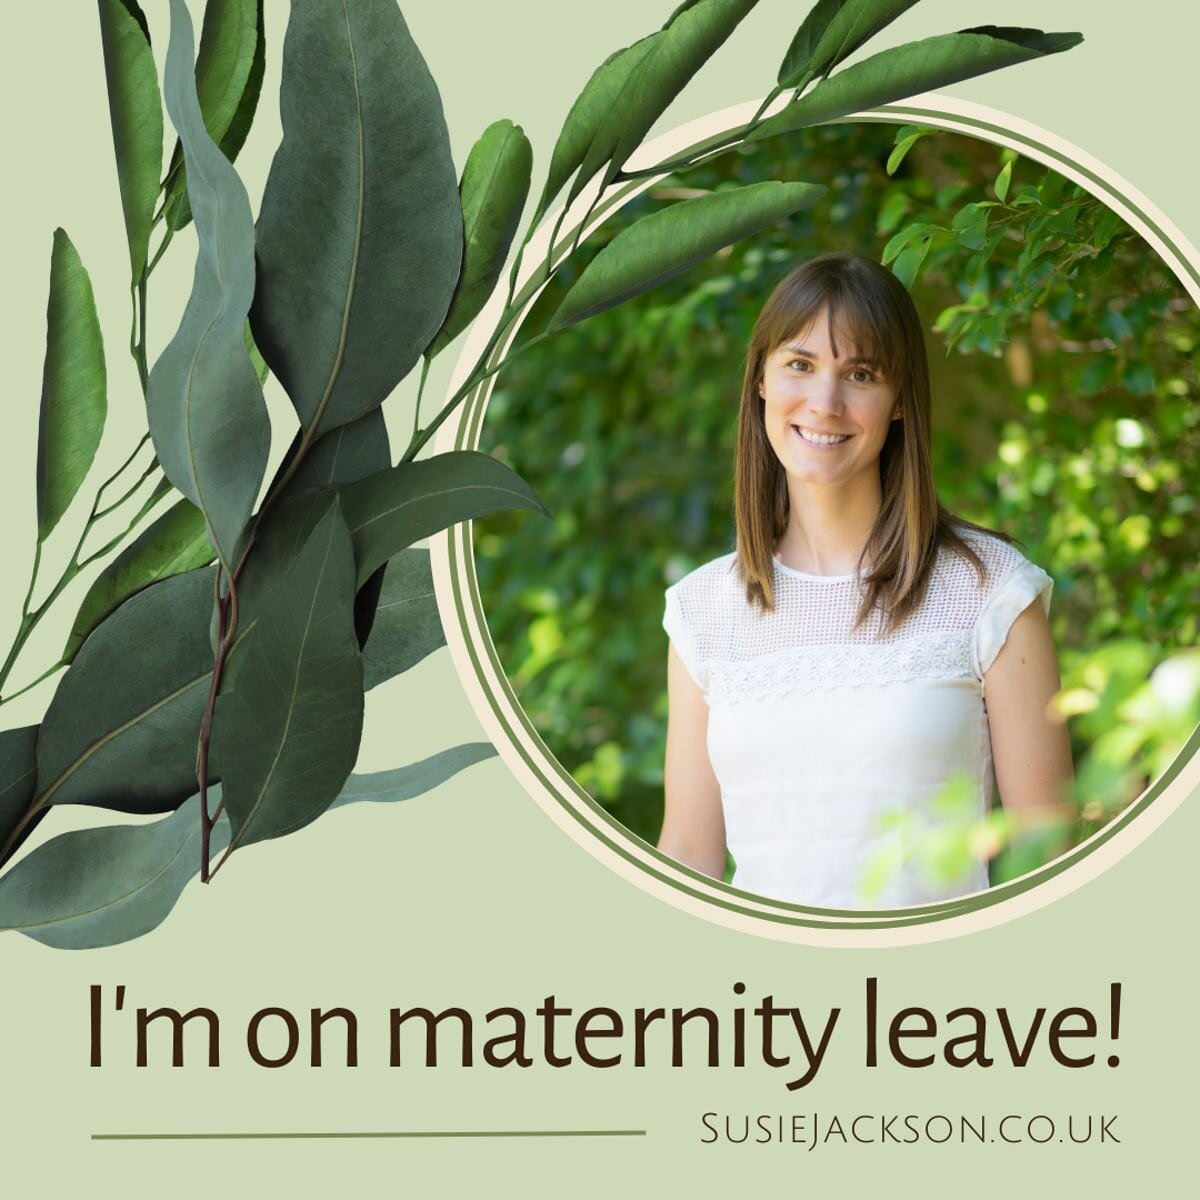 It's goodbye for now... The time has come - this is me signing off for maternity leave!

I'm expecting to be back to work in some capacity from November, but I'm going to play things by ear a little bit and see how I feel between now and then.

That 